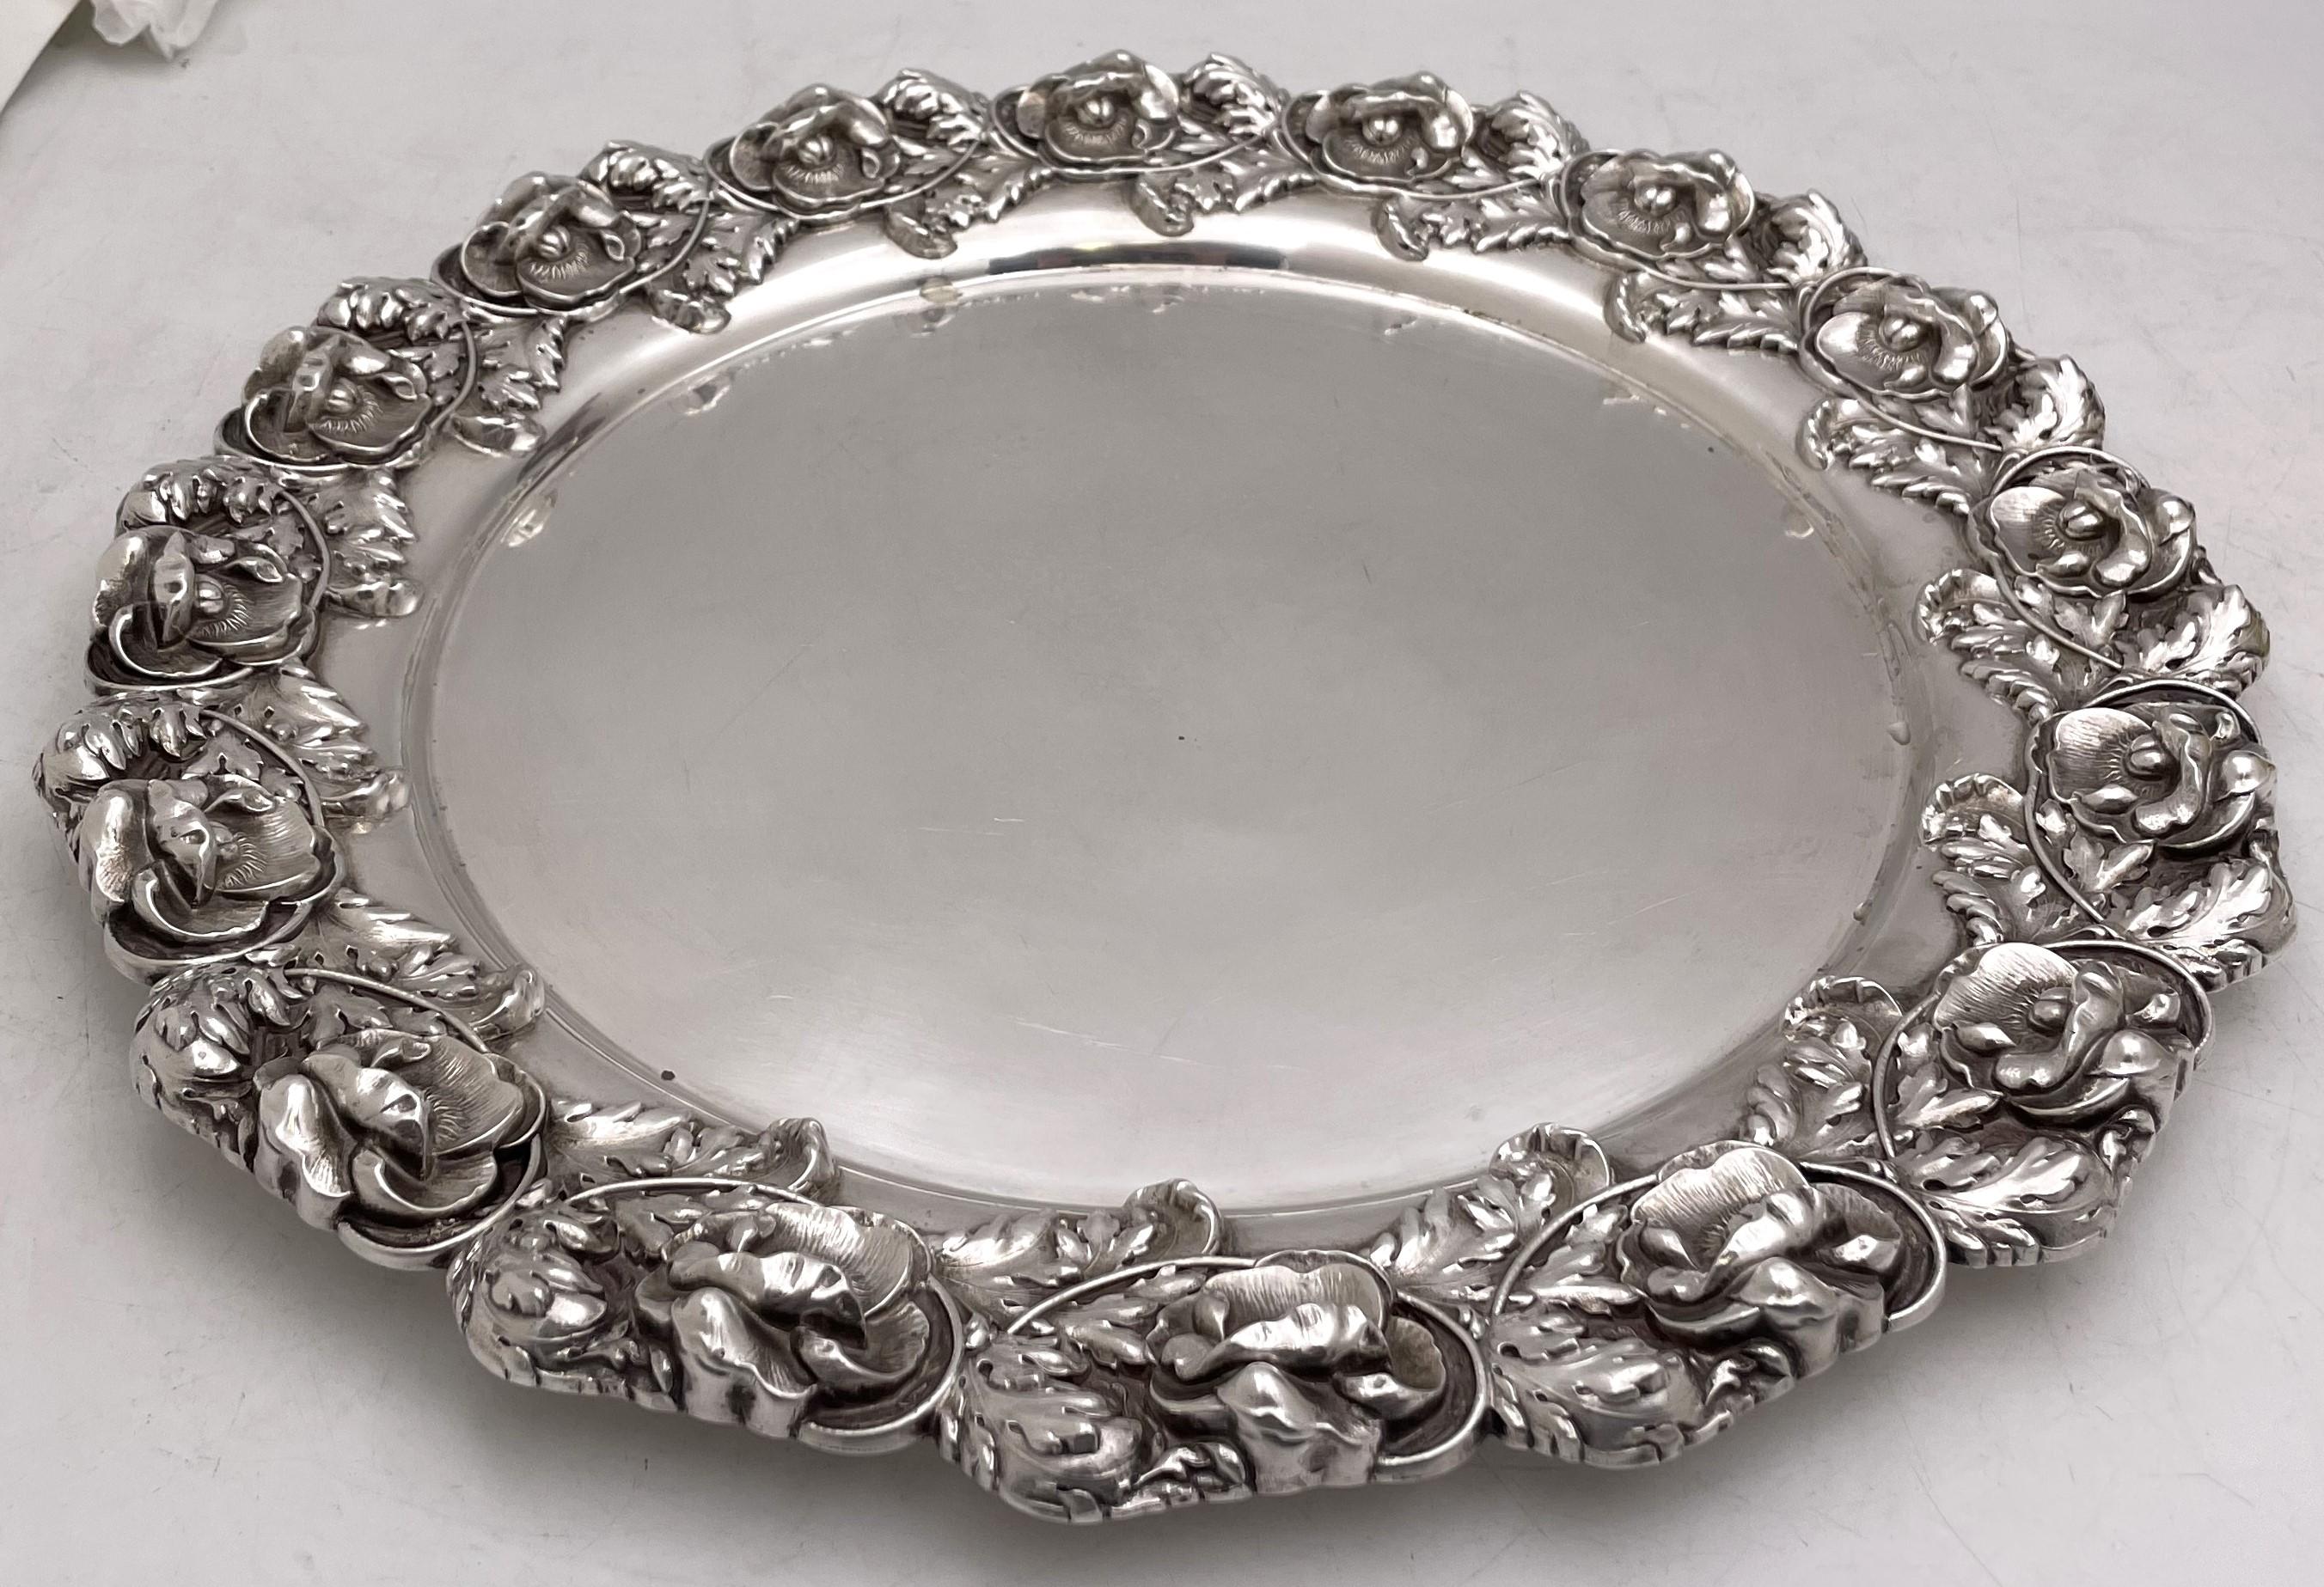 Whiting sterling silver round tray in Art Nouveau style from the early 20th century, adorned with three dimensional anemones and natural motifs. It measures 14 1/2'' in diameter by 1'' in height, weighs 39.2 troy ounces, and bears hallmarks as